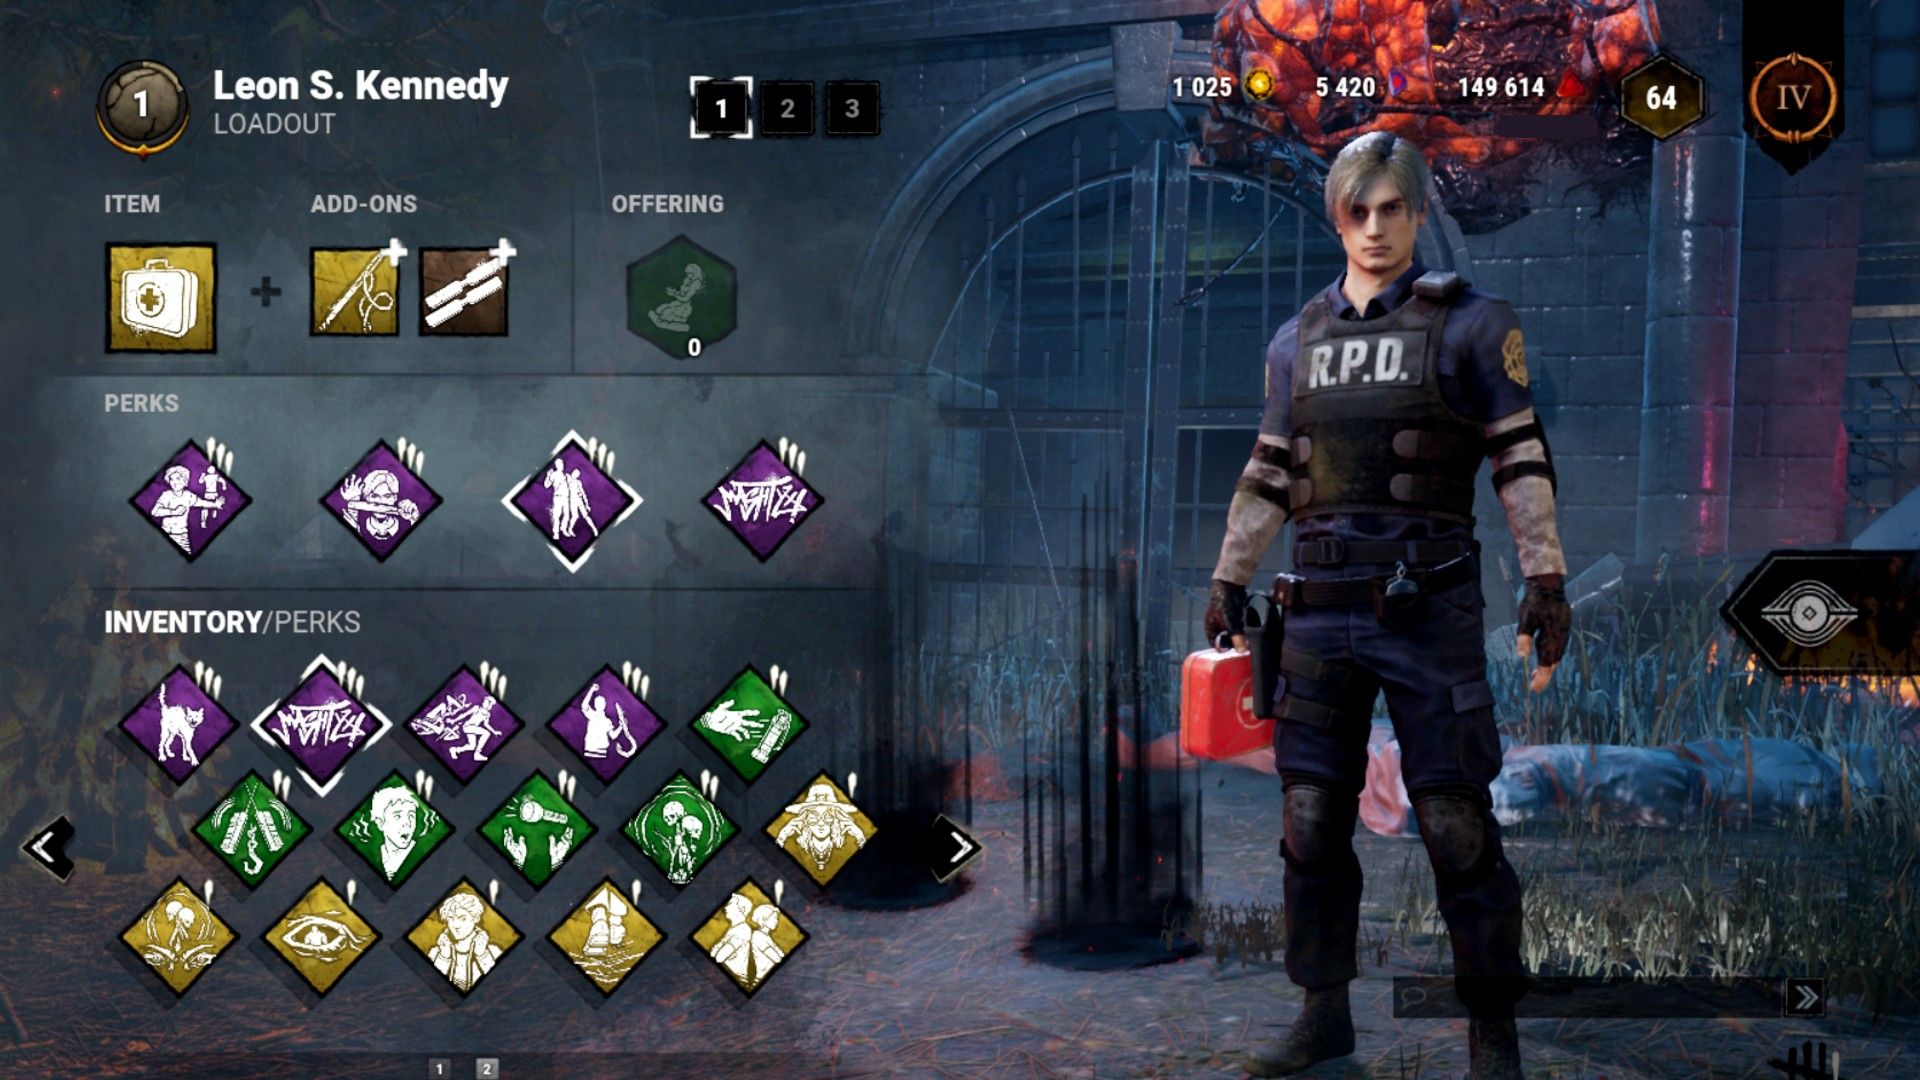 Leon Kennedy with an Altruist-heavy build in Dead By Daylight